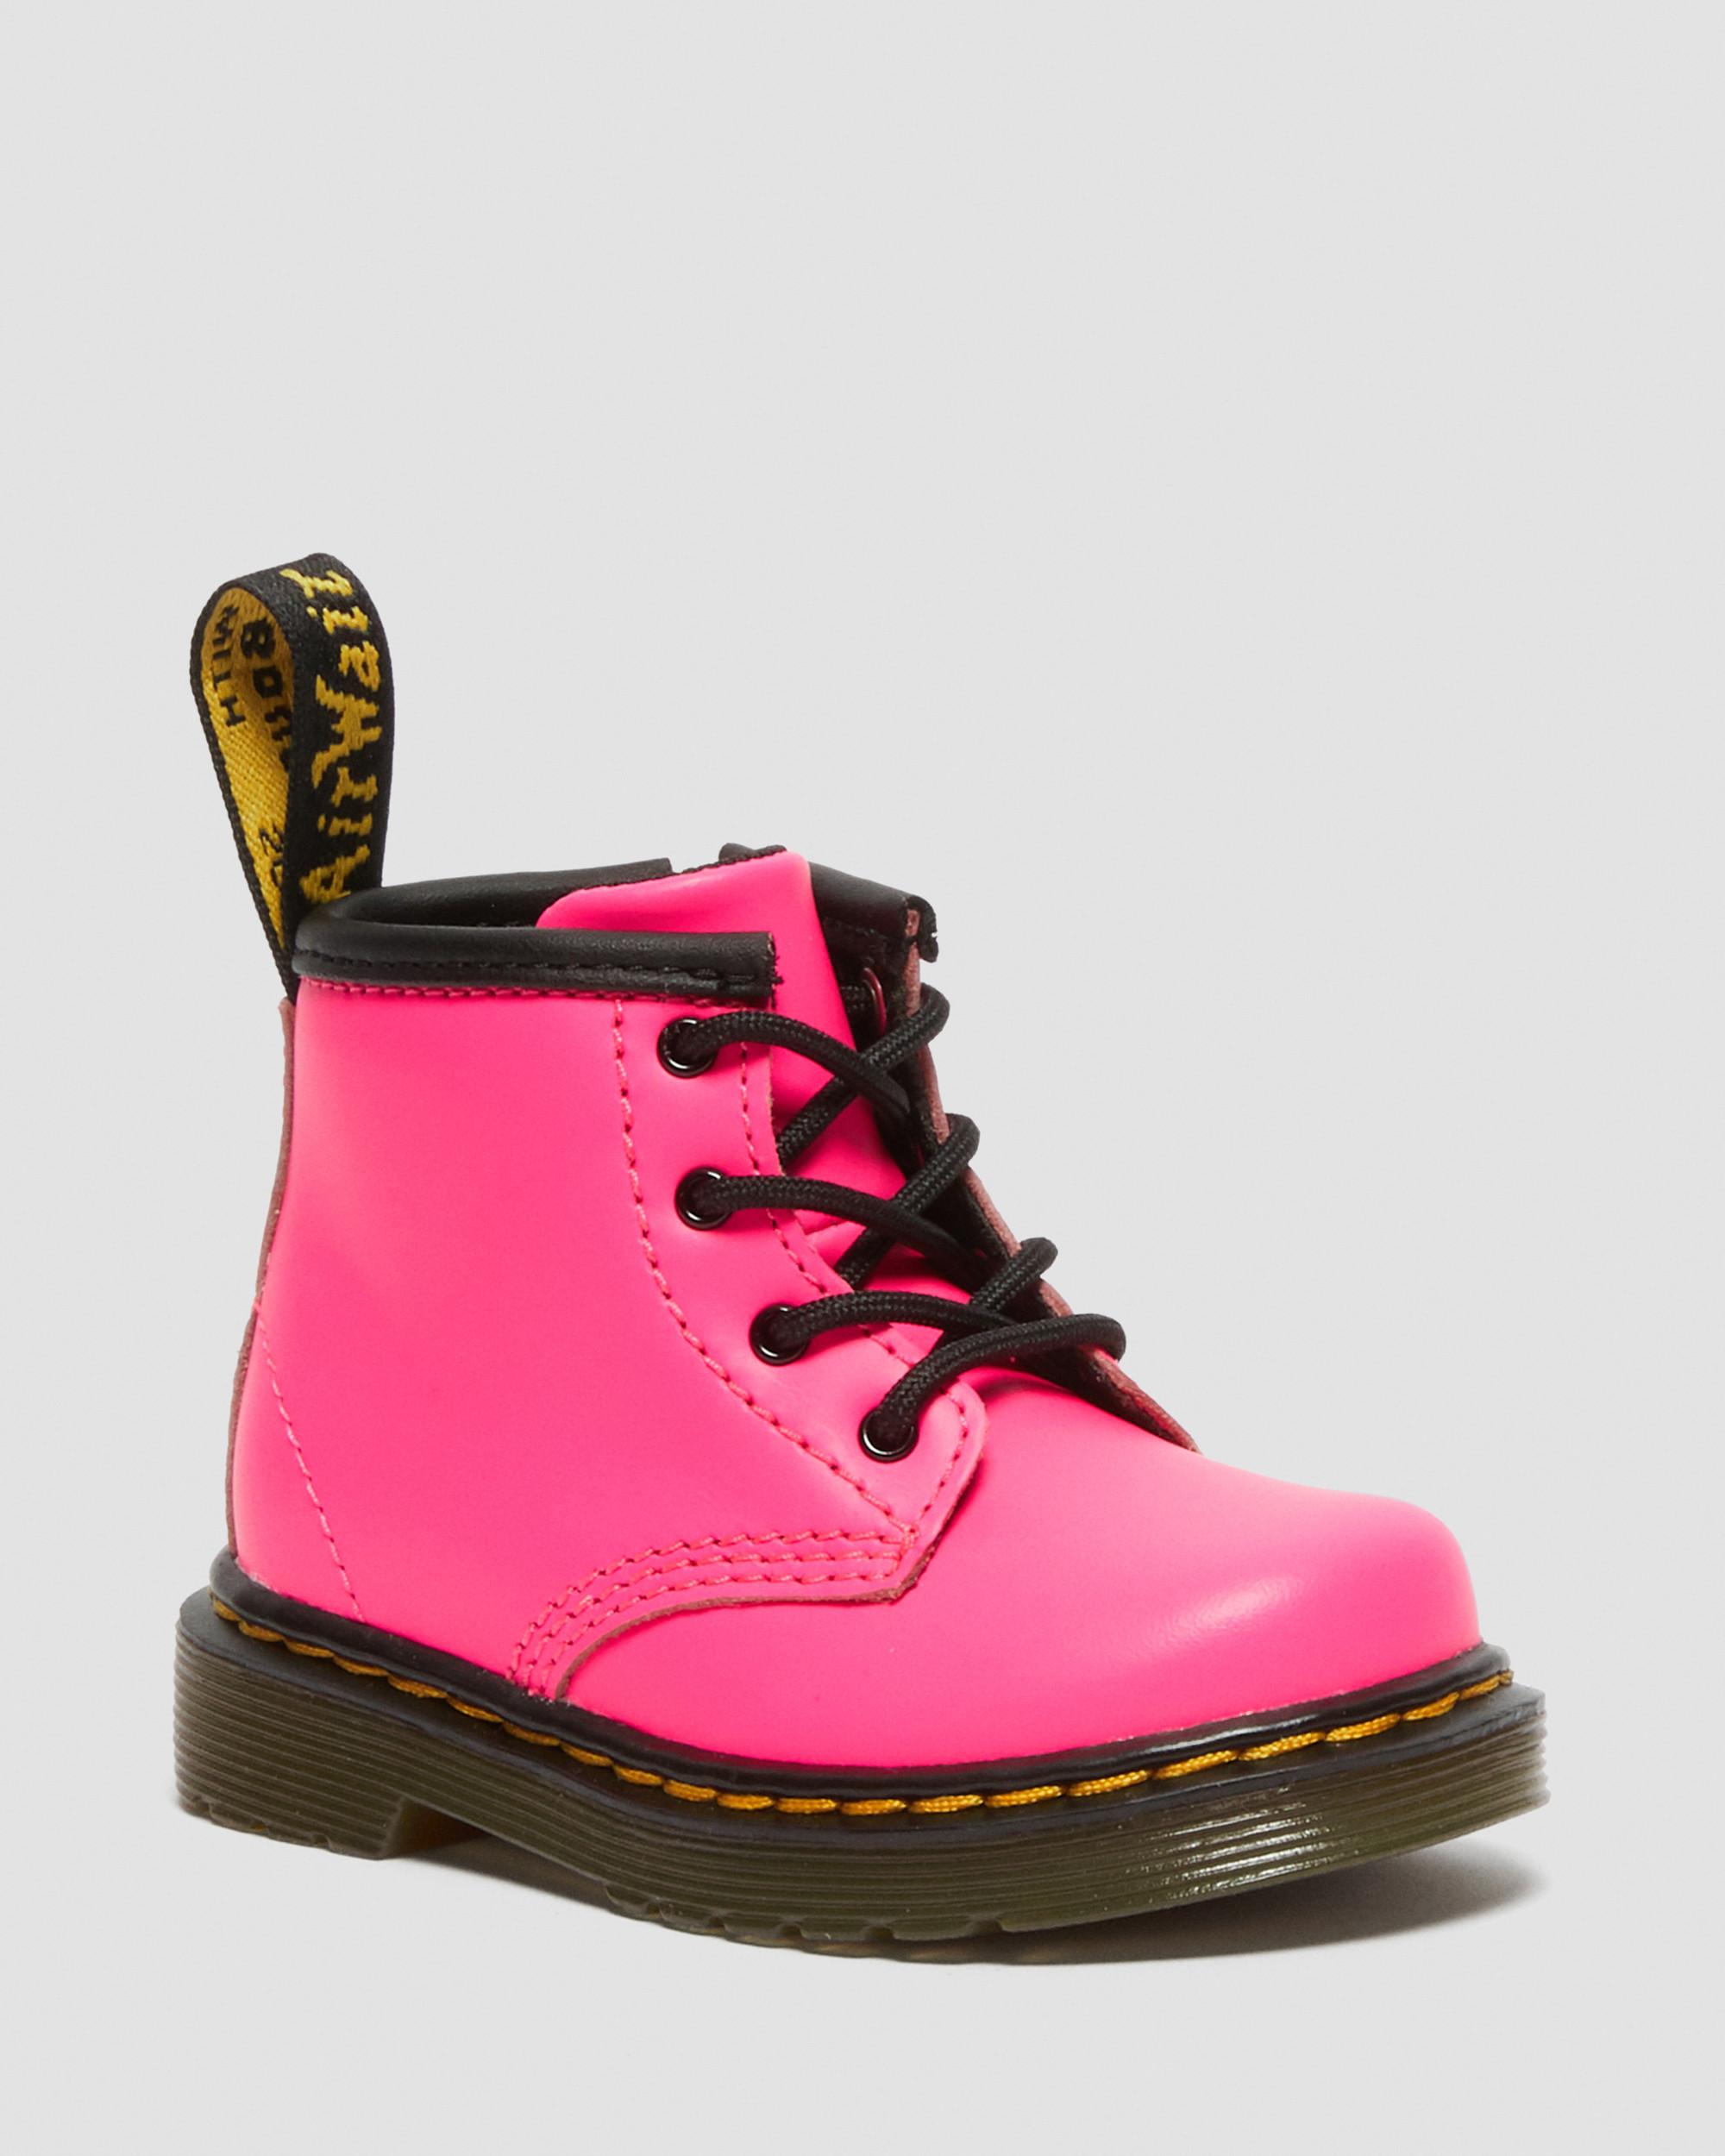 Infant 1460 Softy T Leather Lace Up Boots in Pink